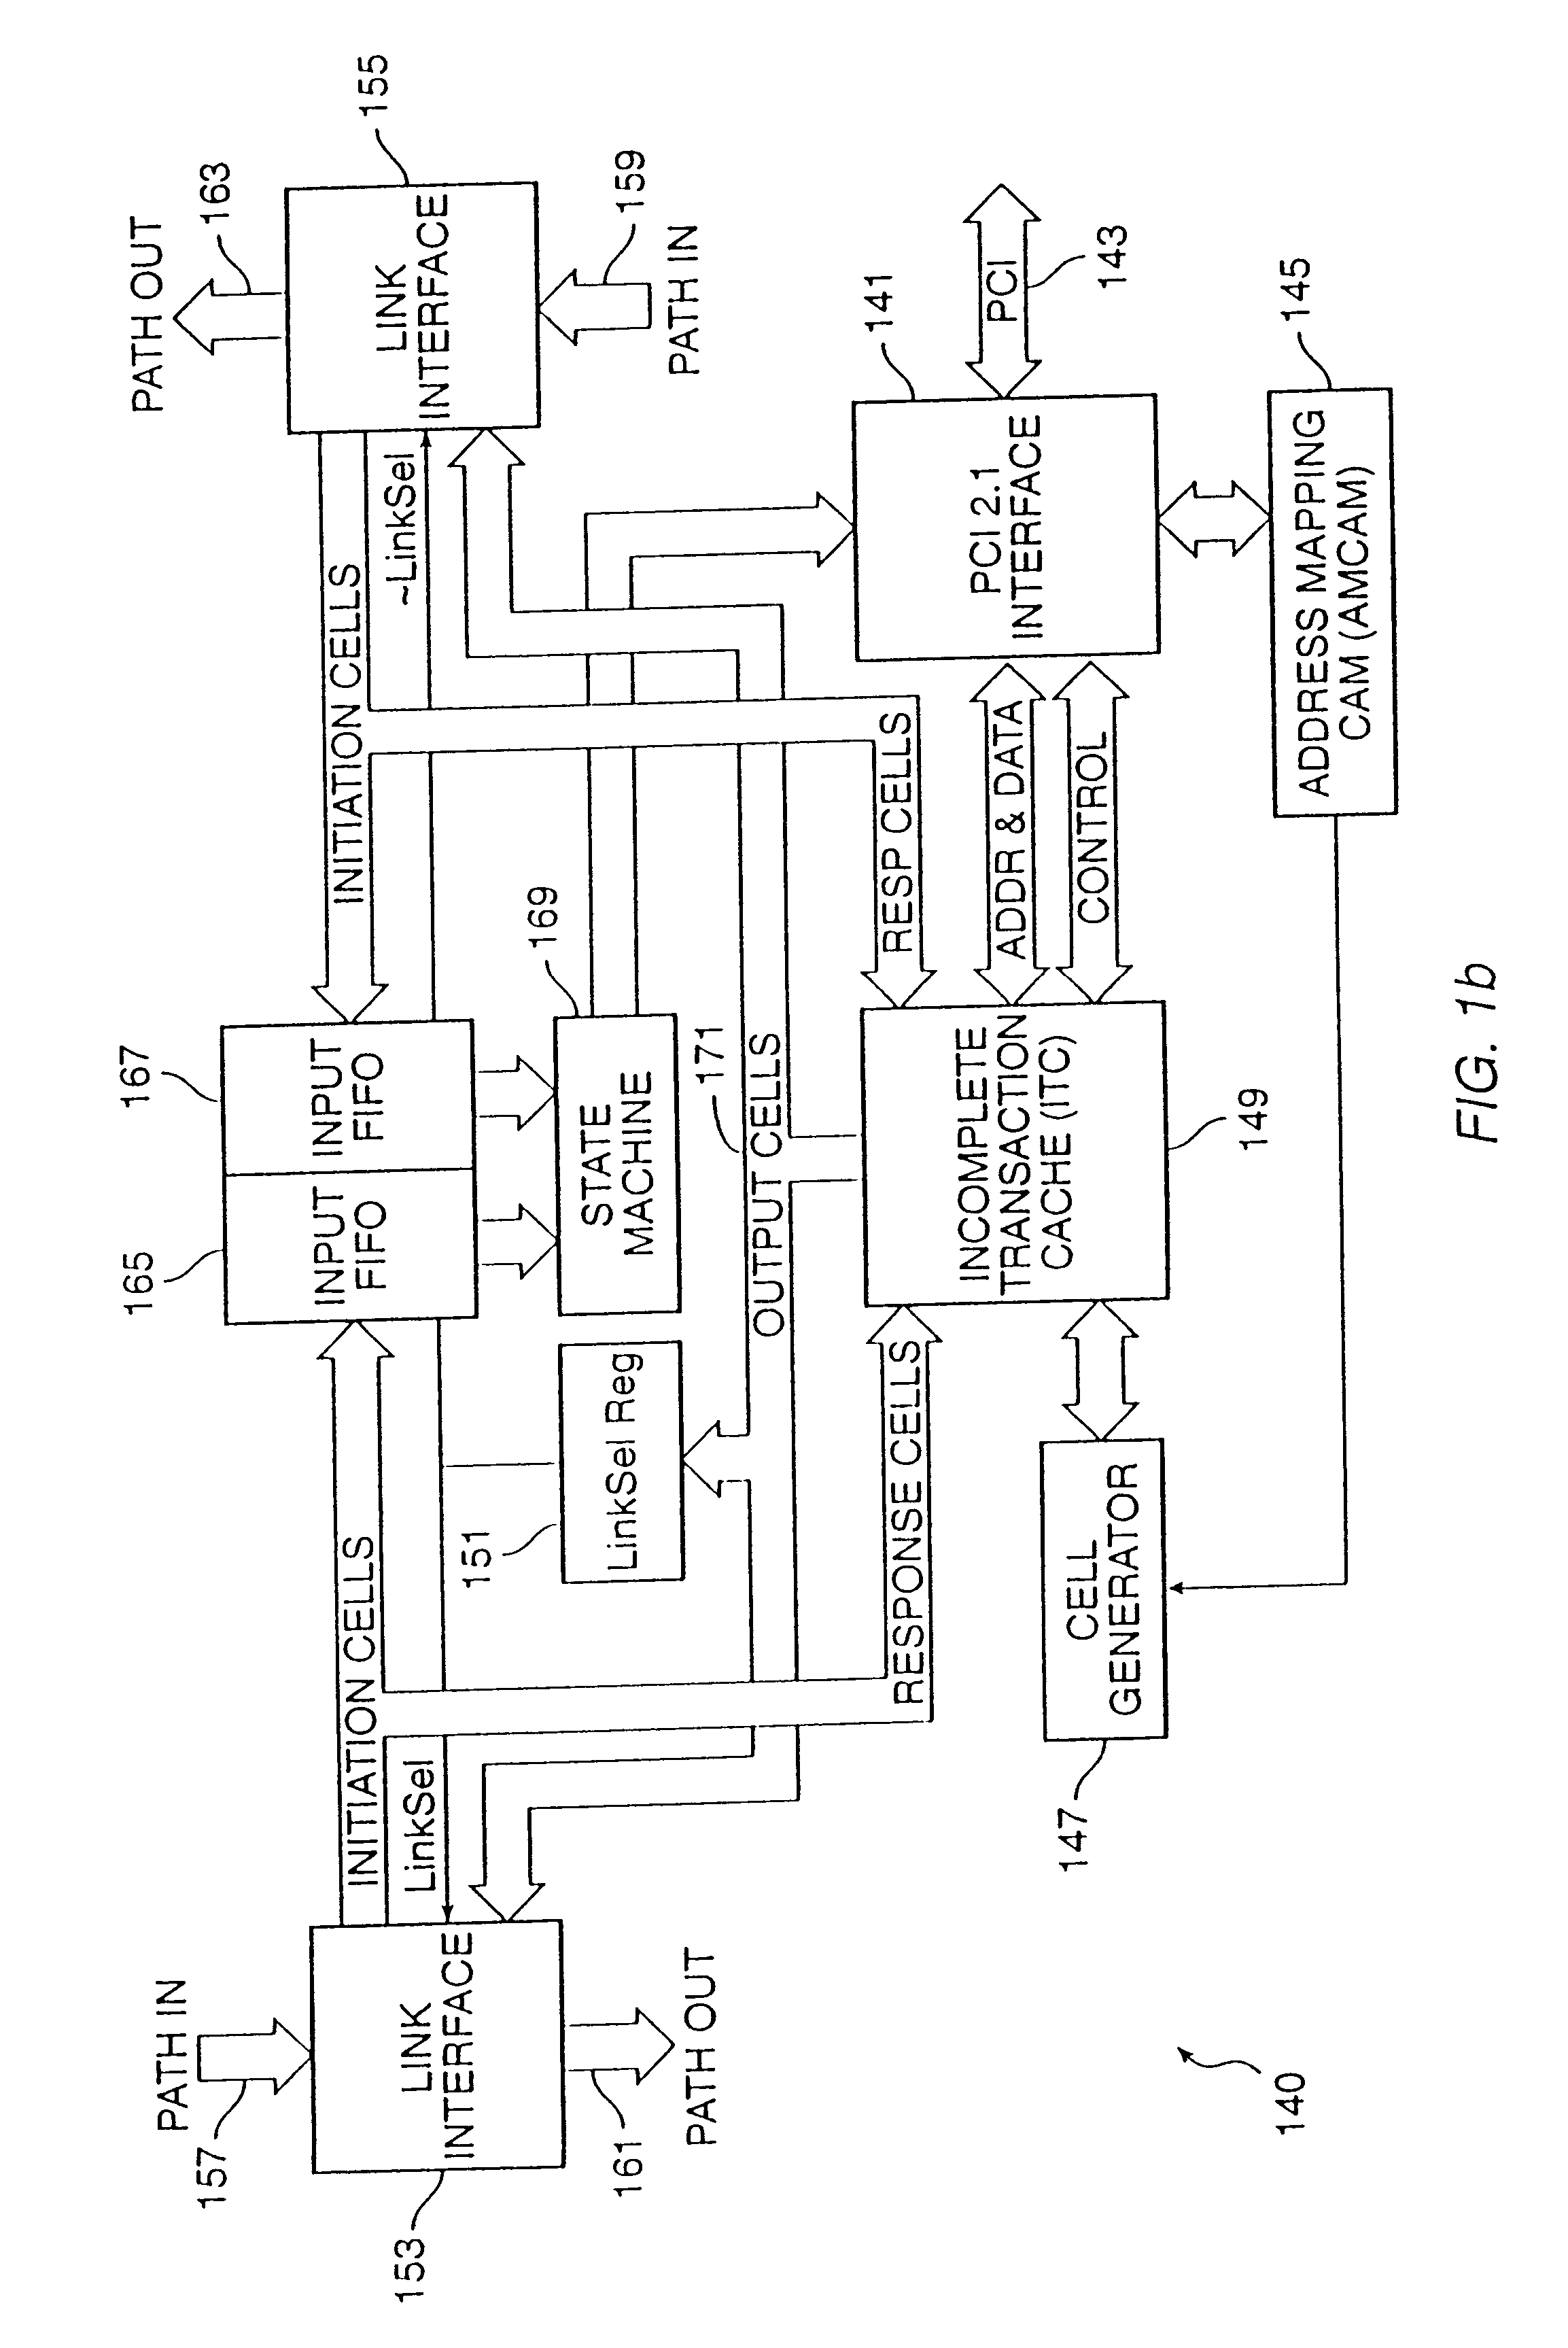 Method and apparatus for a fault tolerant software transparent and high data integrity extension to a backplane bus or interconnect